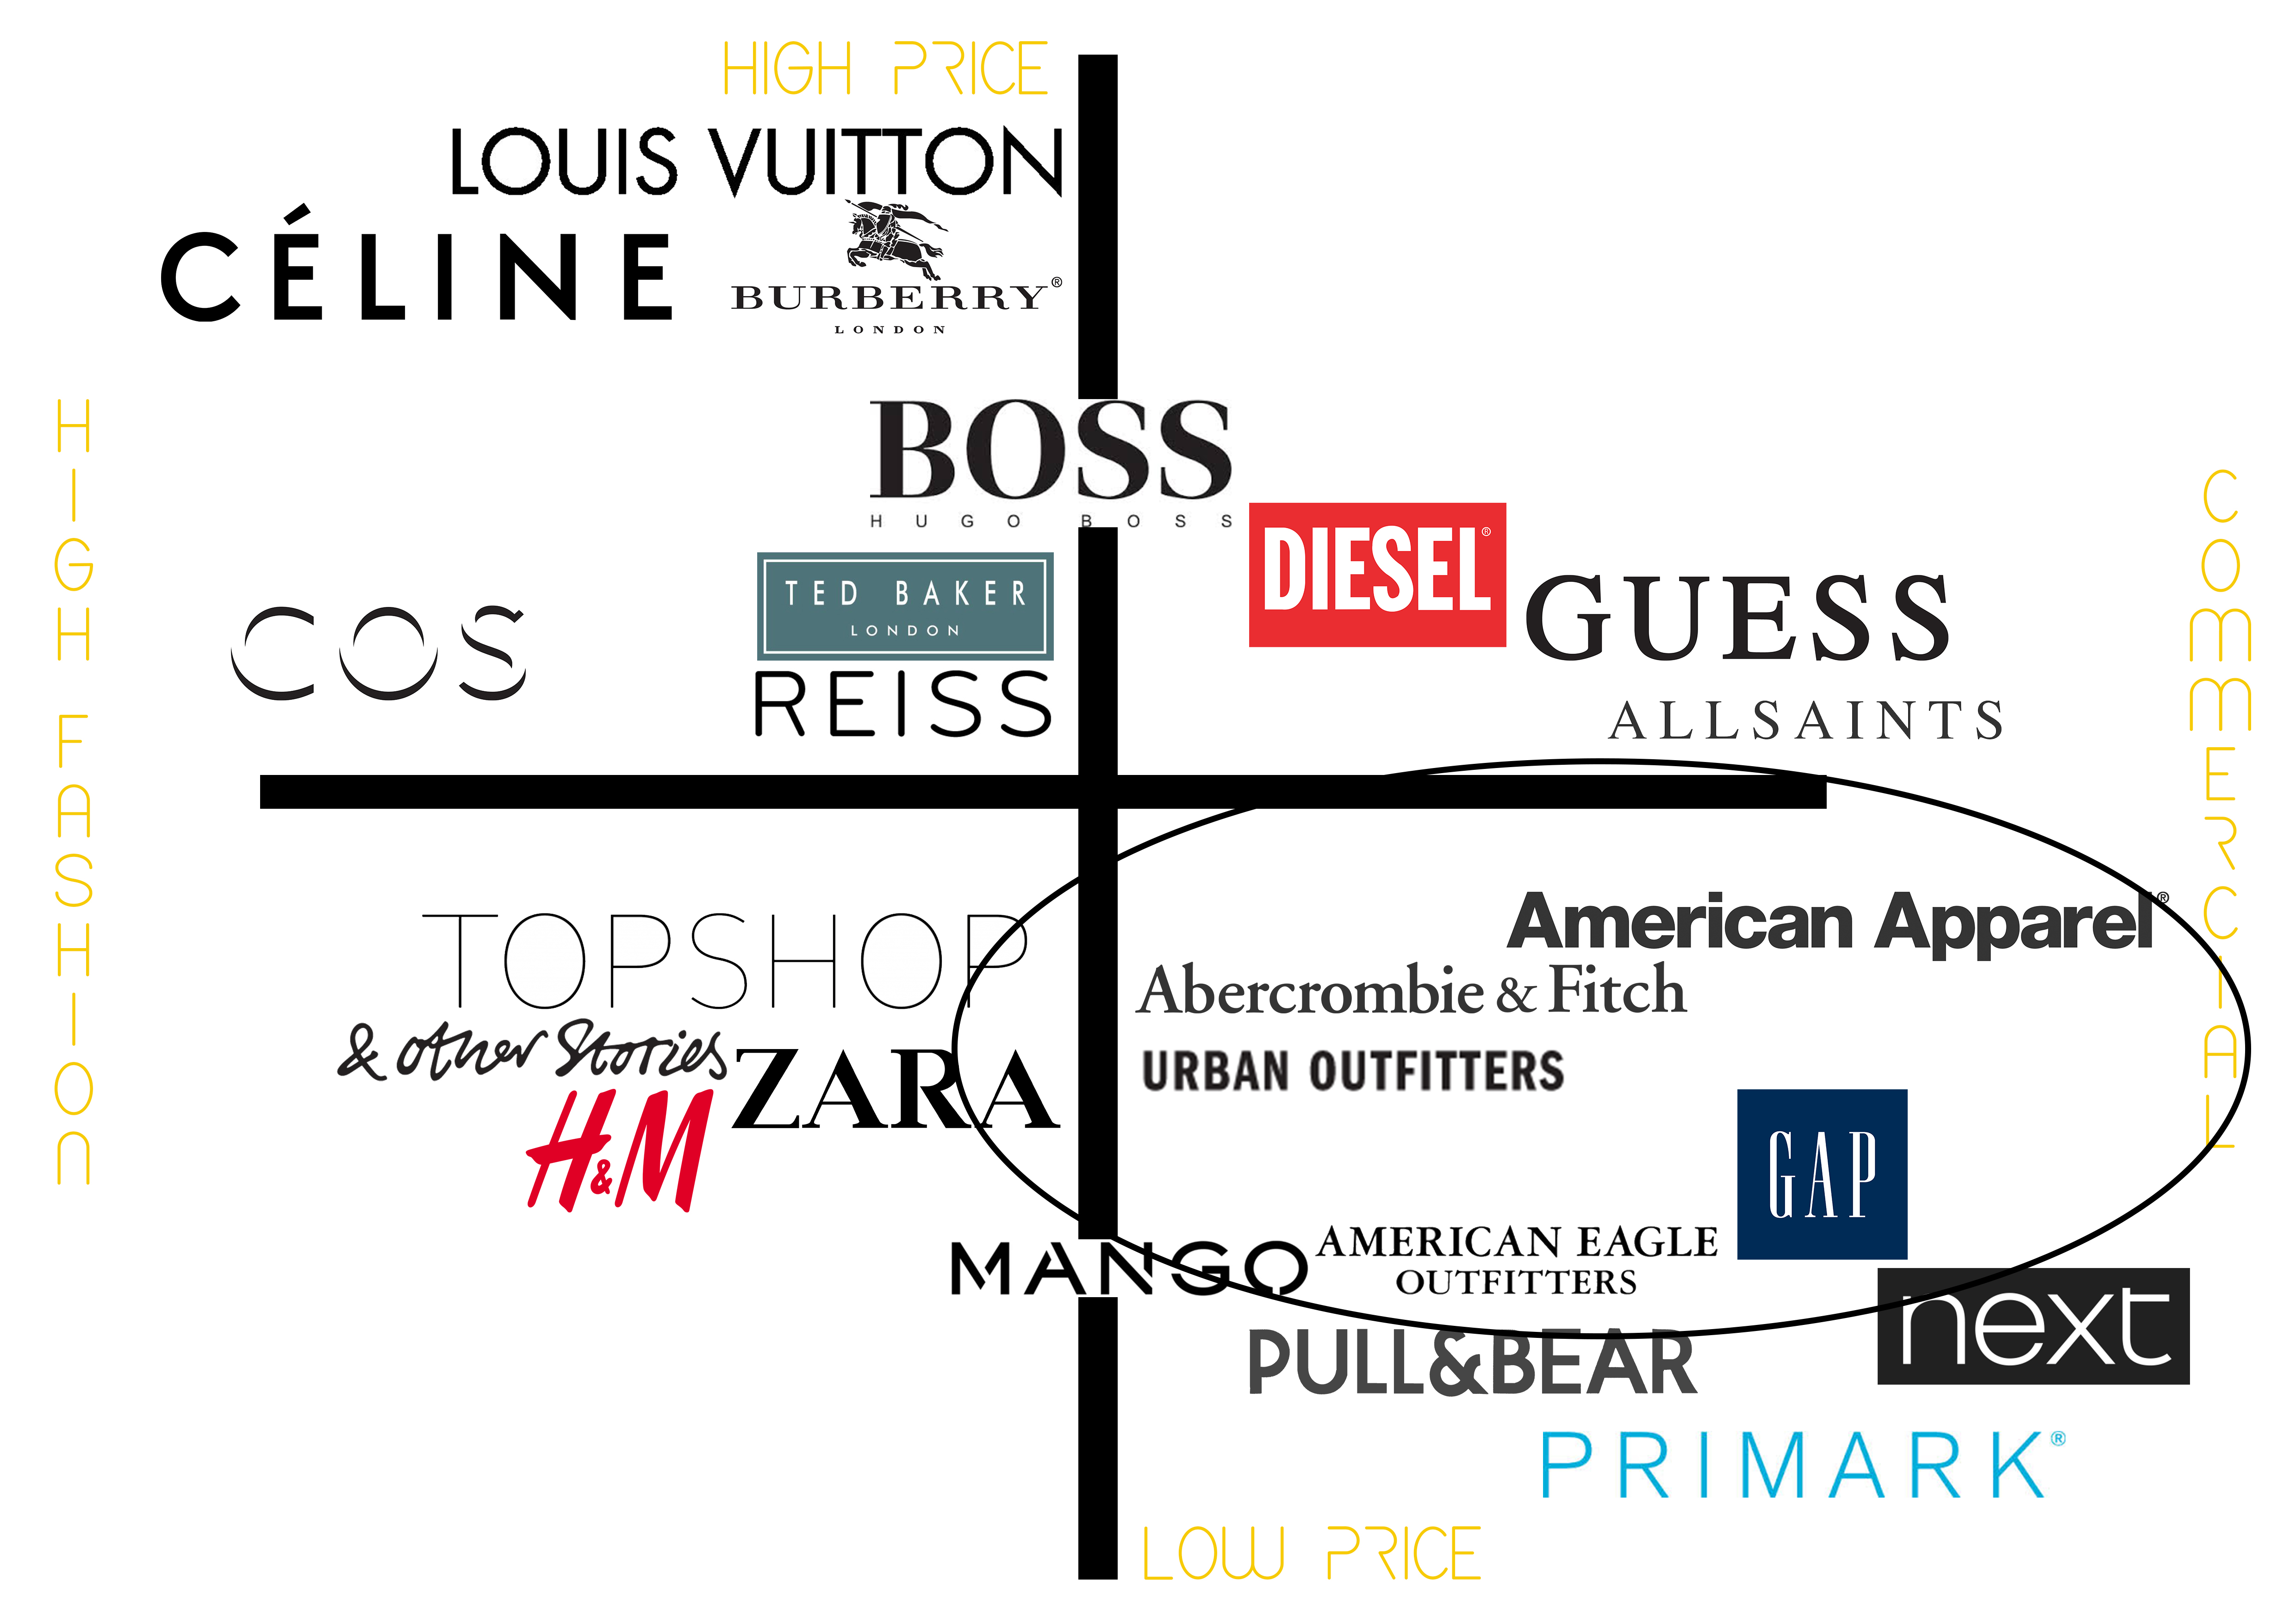 abercrombie and fitch competitors